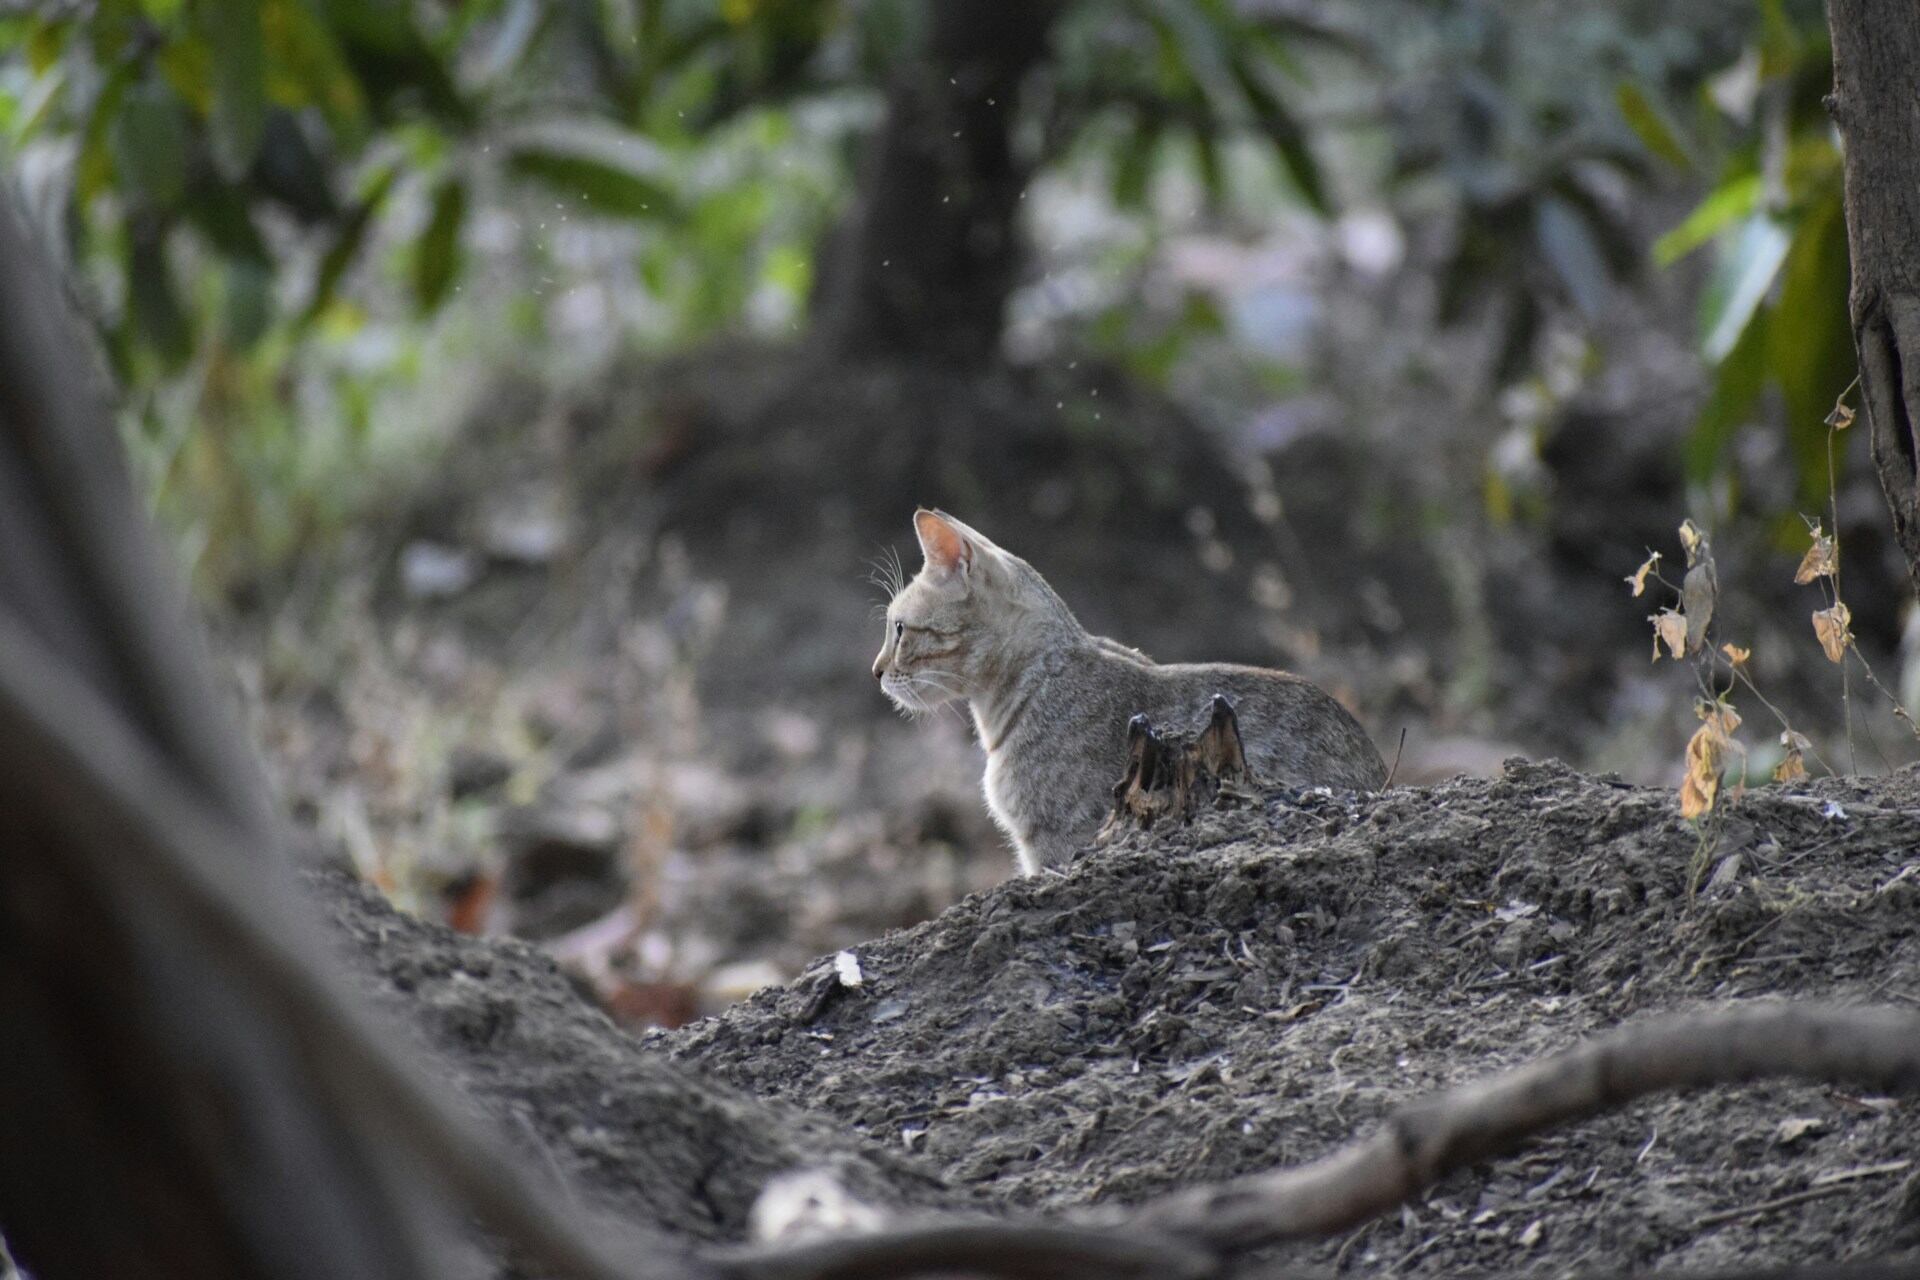 A small grey cat exploring a forest